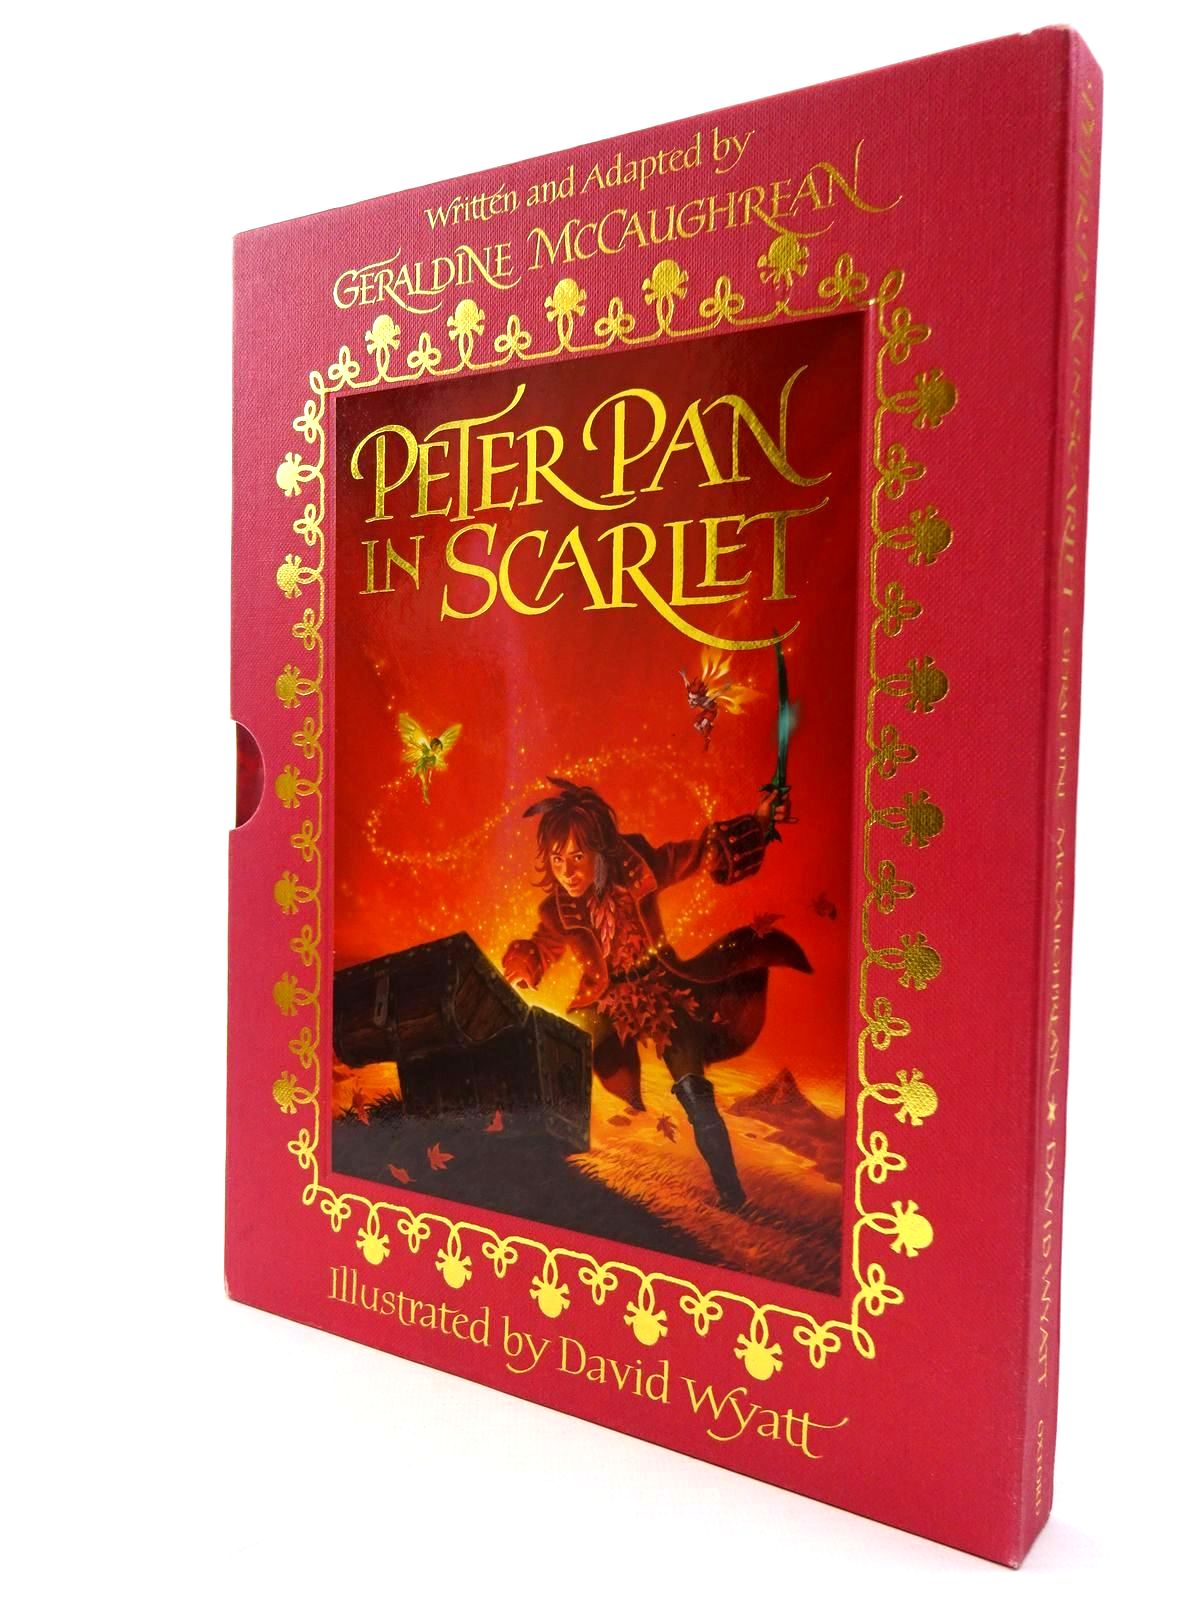 Photo of PETER PAN IN SCARLET written by McCaughrean, Geraldine illustrated by Wyatt, David published by Oxford University Press (STOCK CODE: 2130465)  for sale by Stella & Rose's Books